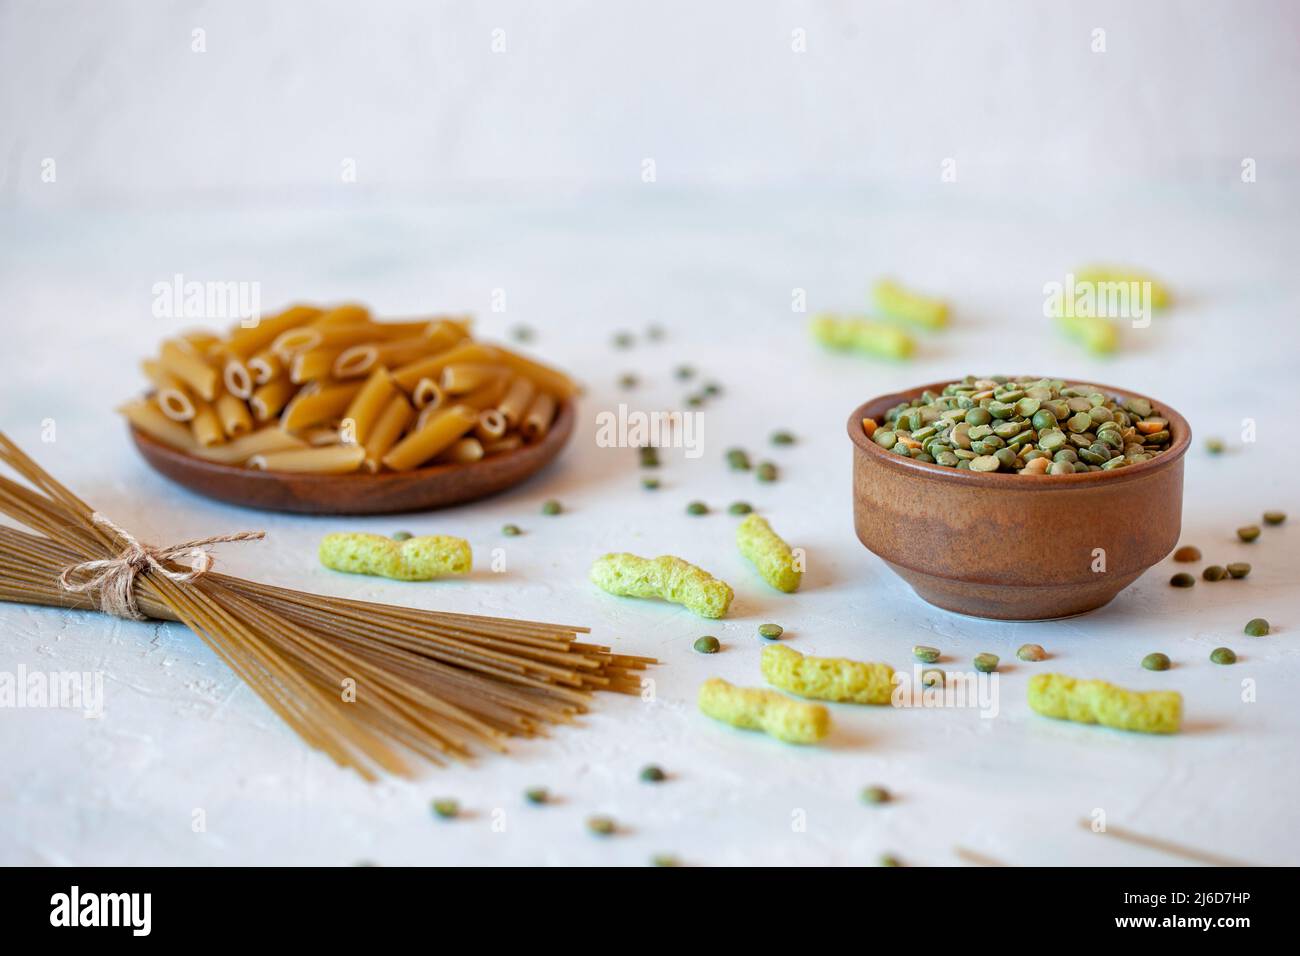 Different types of pasta and snacks made of pea flour, no gluten food Stock Photo